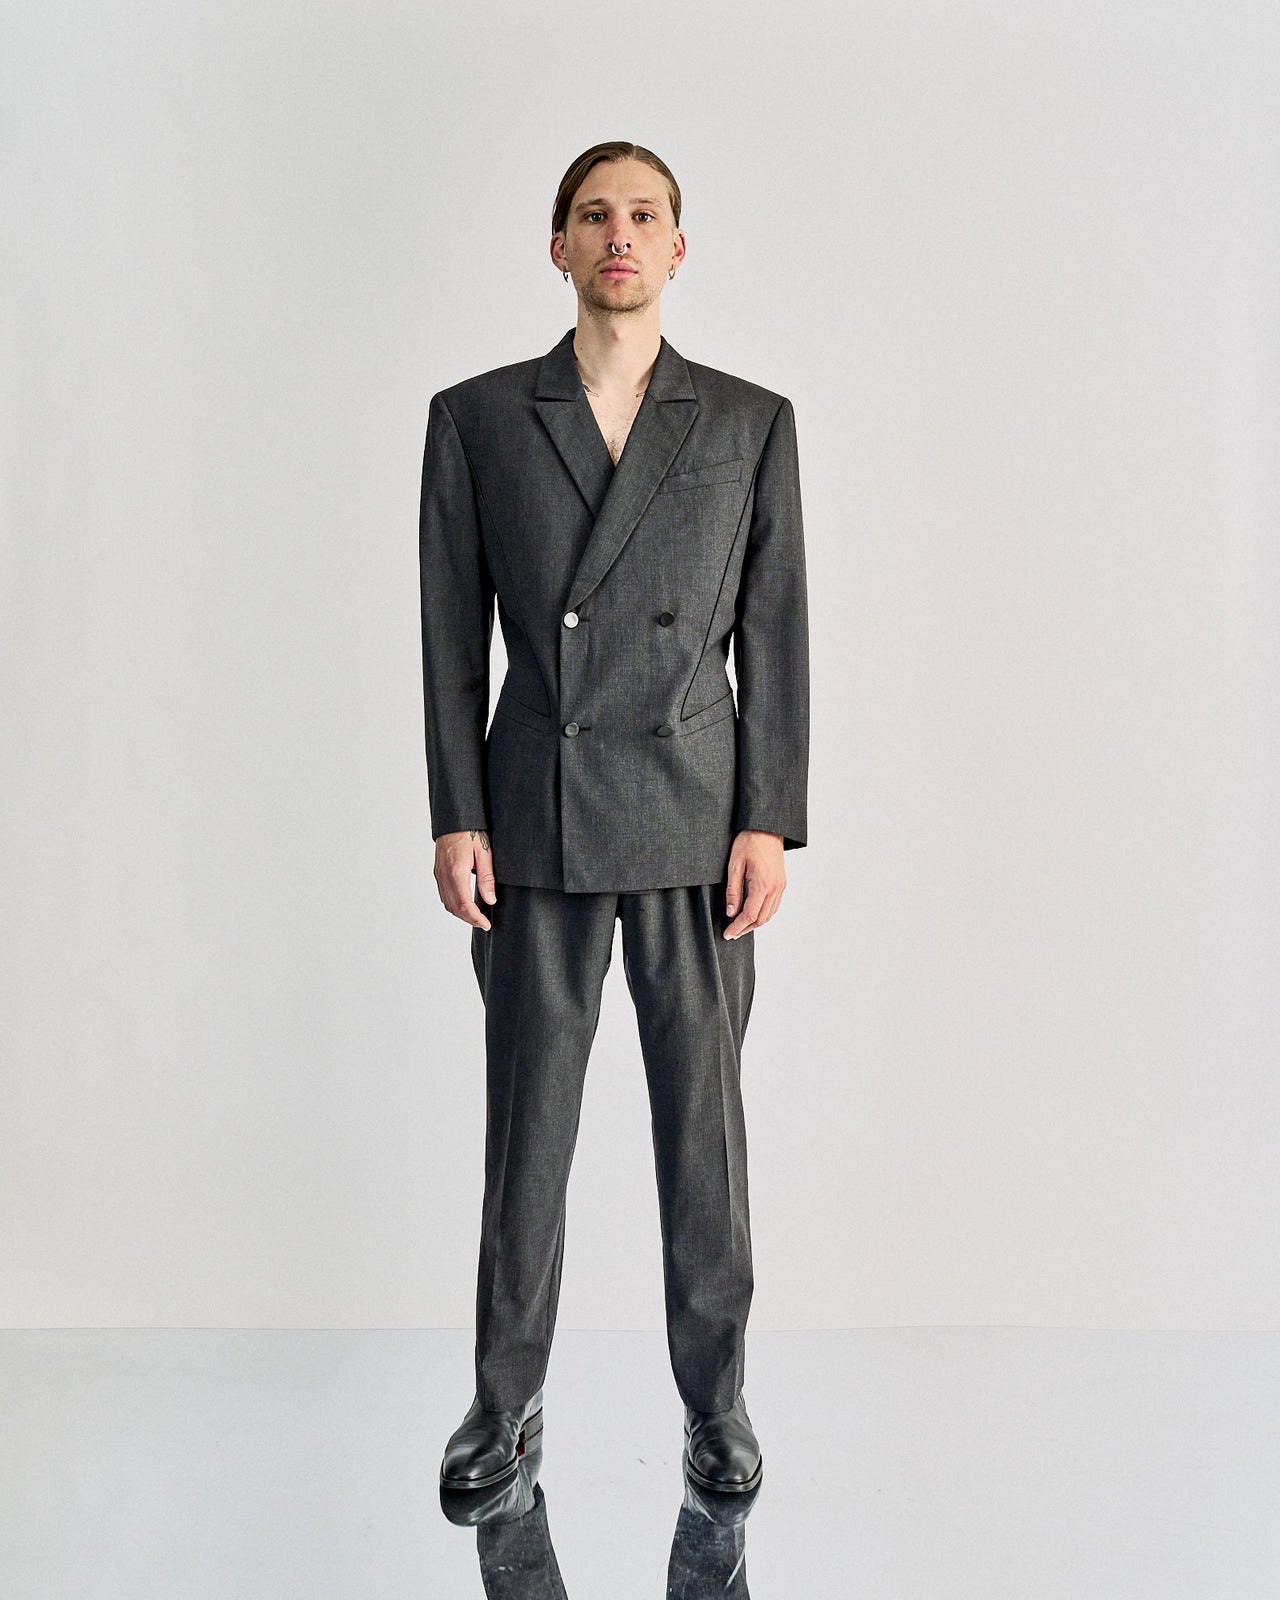 Thierry Mugler Vintage 1980's double breasted 2-piece suit